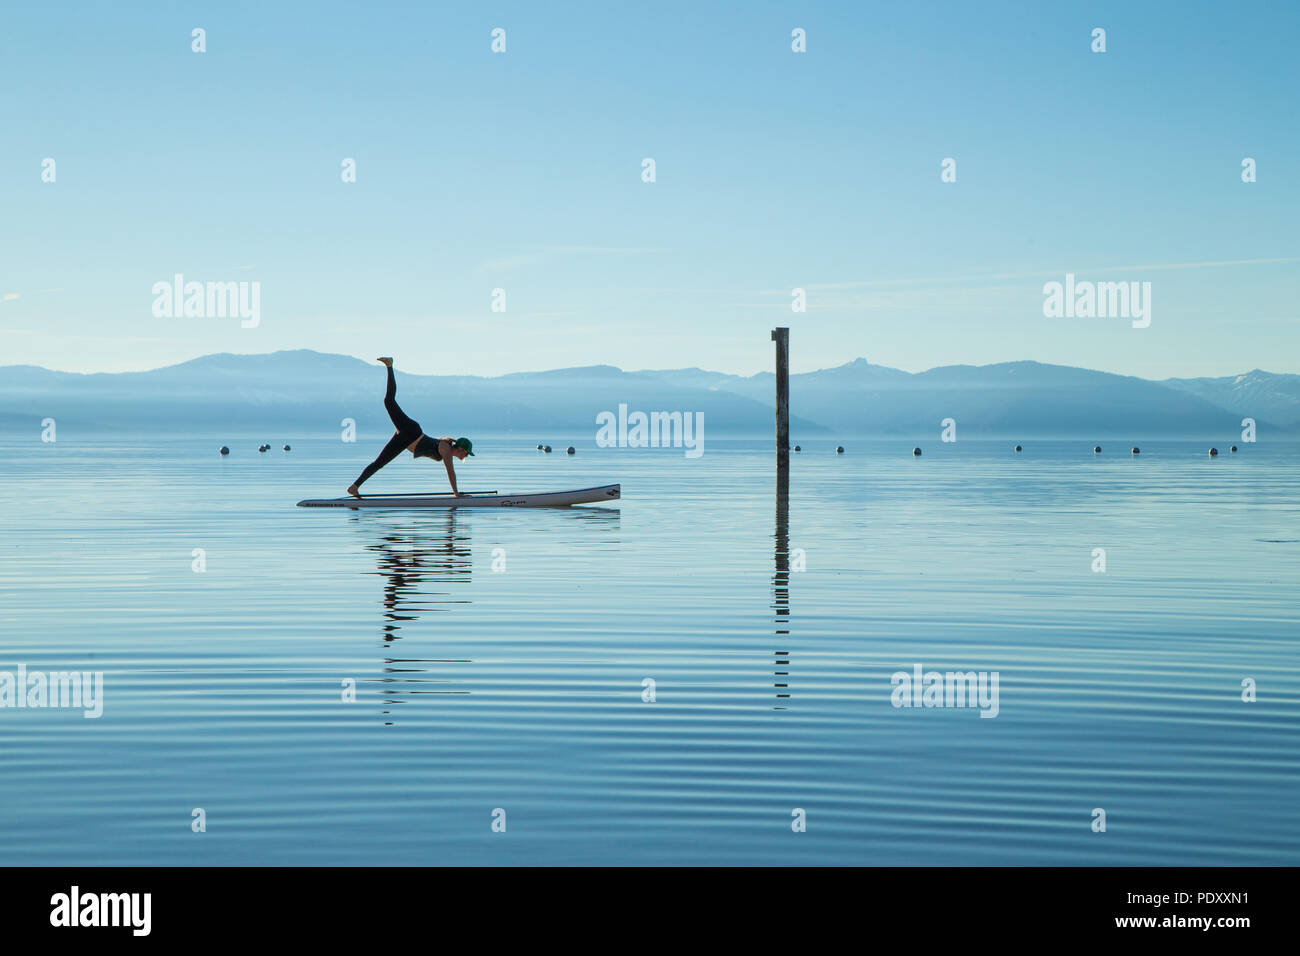 Woman in Yoga Pose on Paddle Board sur Lake, Lake Tahoe, Nevada, USA Banque D'Images